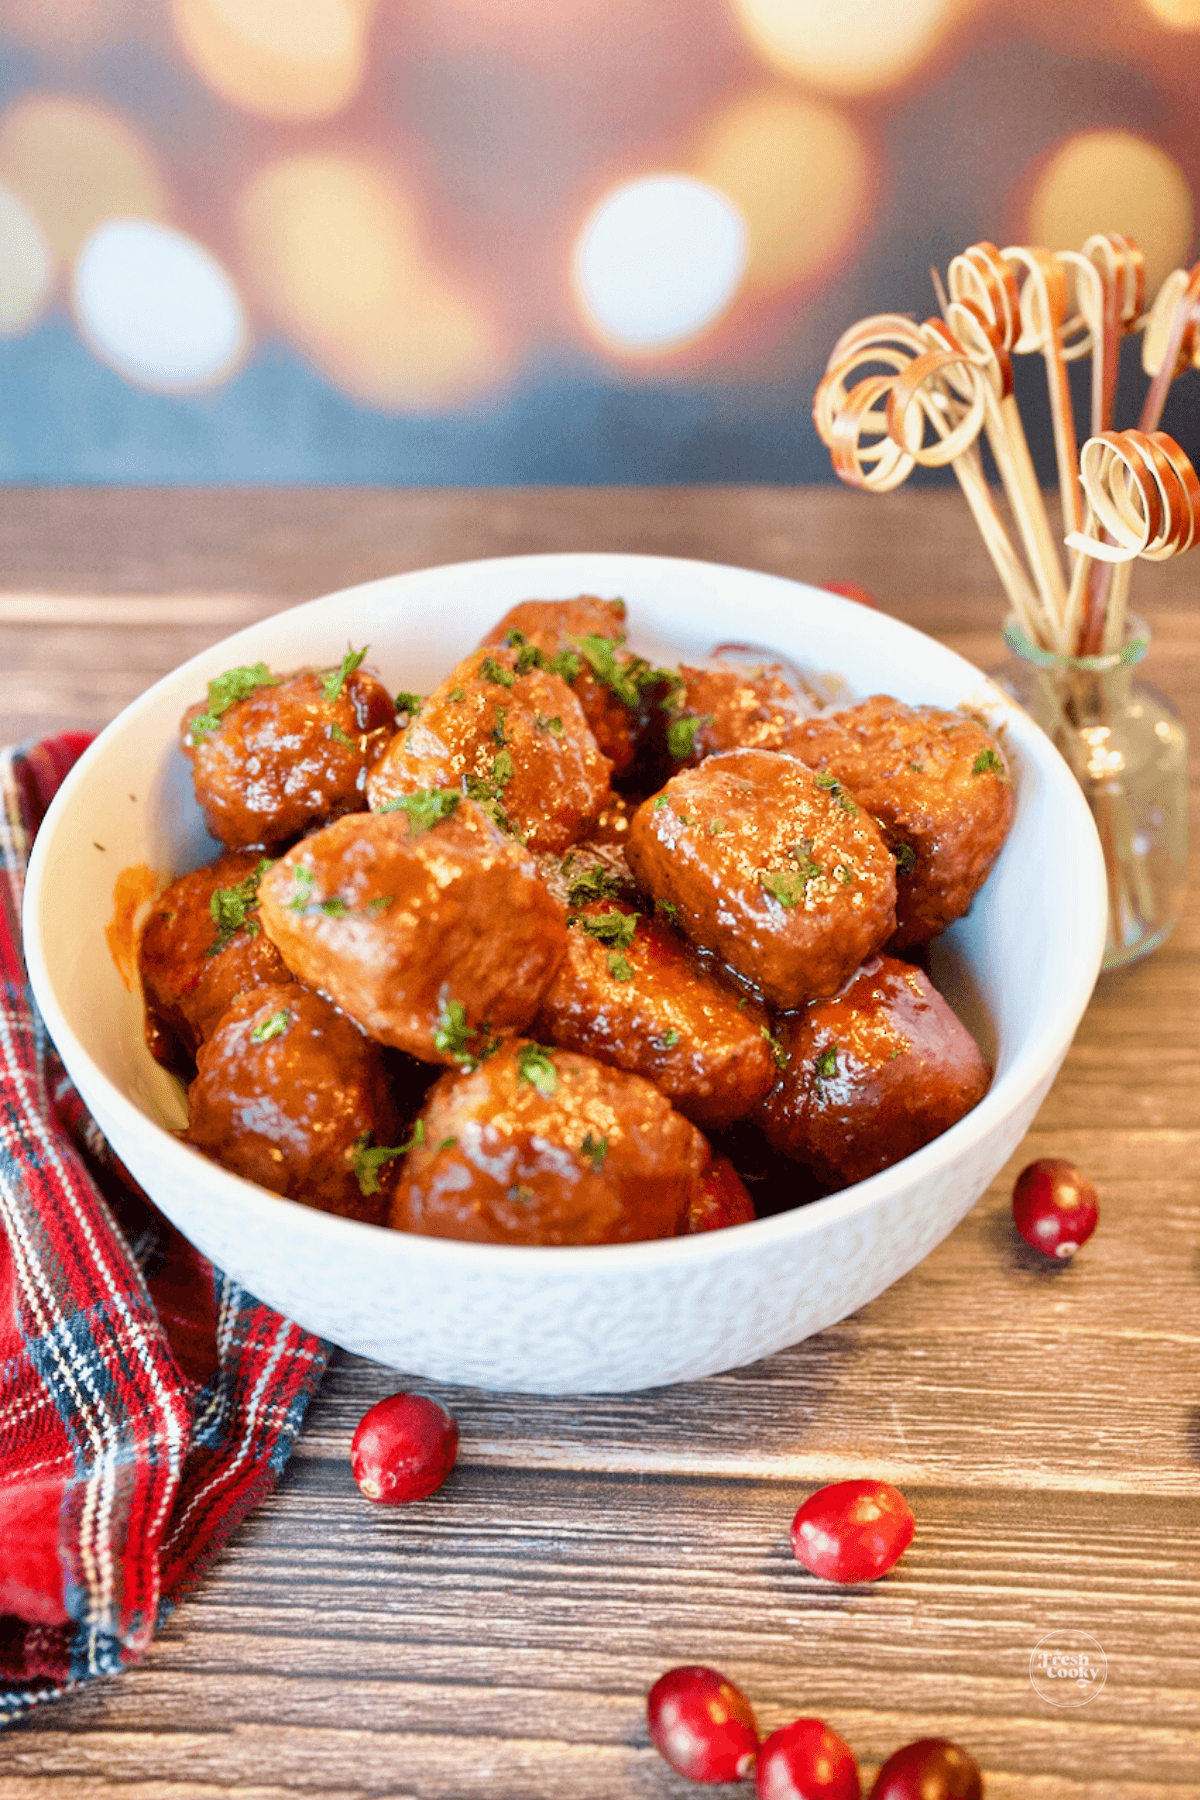 Cranberry Meatballs in serving bowl with wooden skewers for eating.